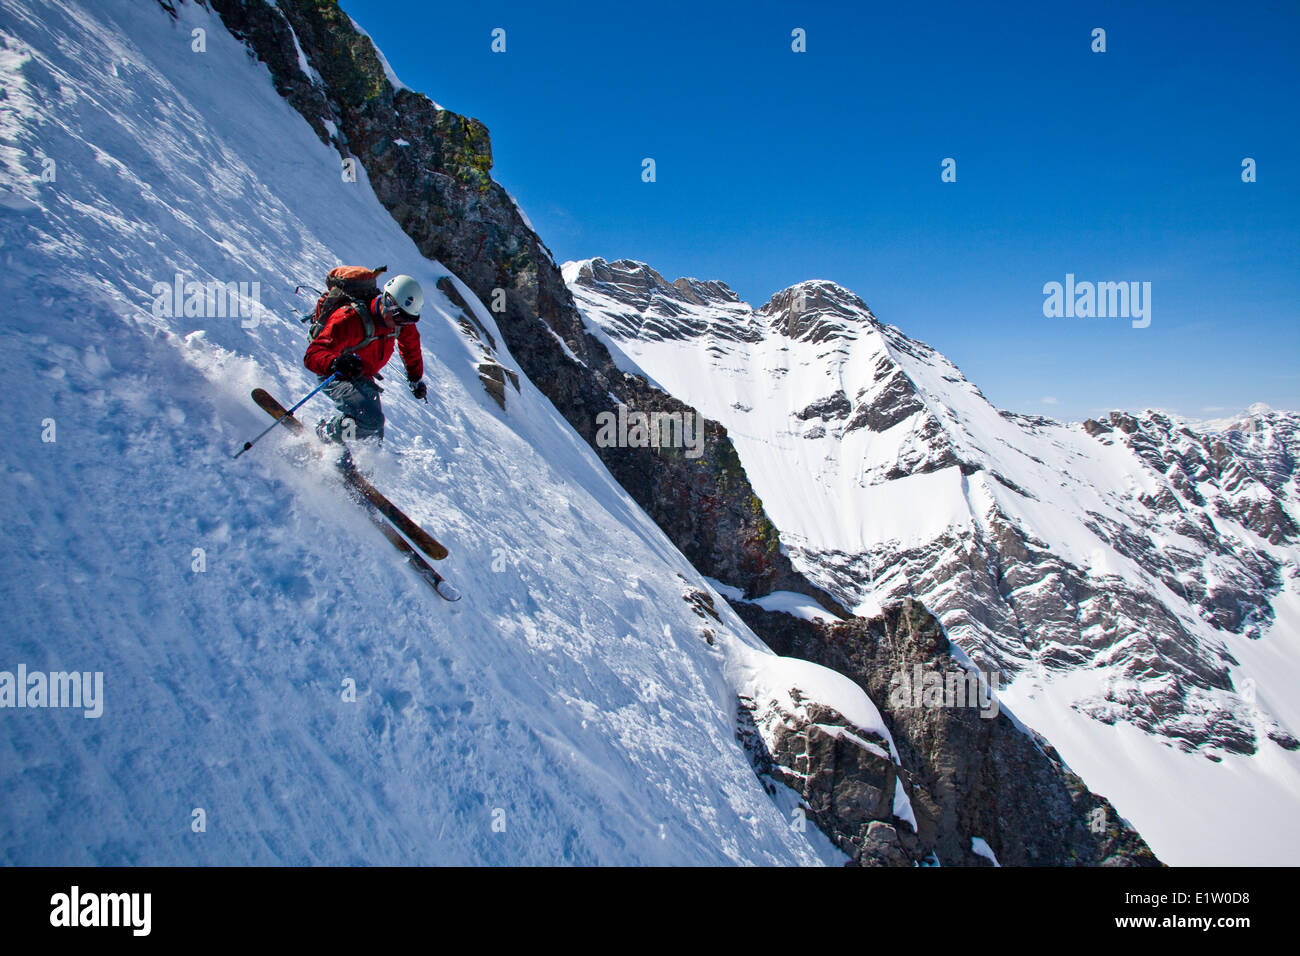 A male backcountry skier on tele skis descends a steep couloir with a unique limestone arch in it. Mt. French Peter Lougheed Stock Photo